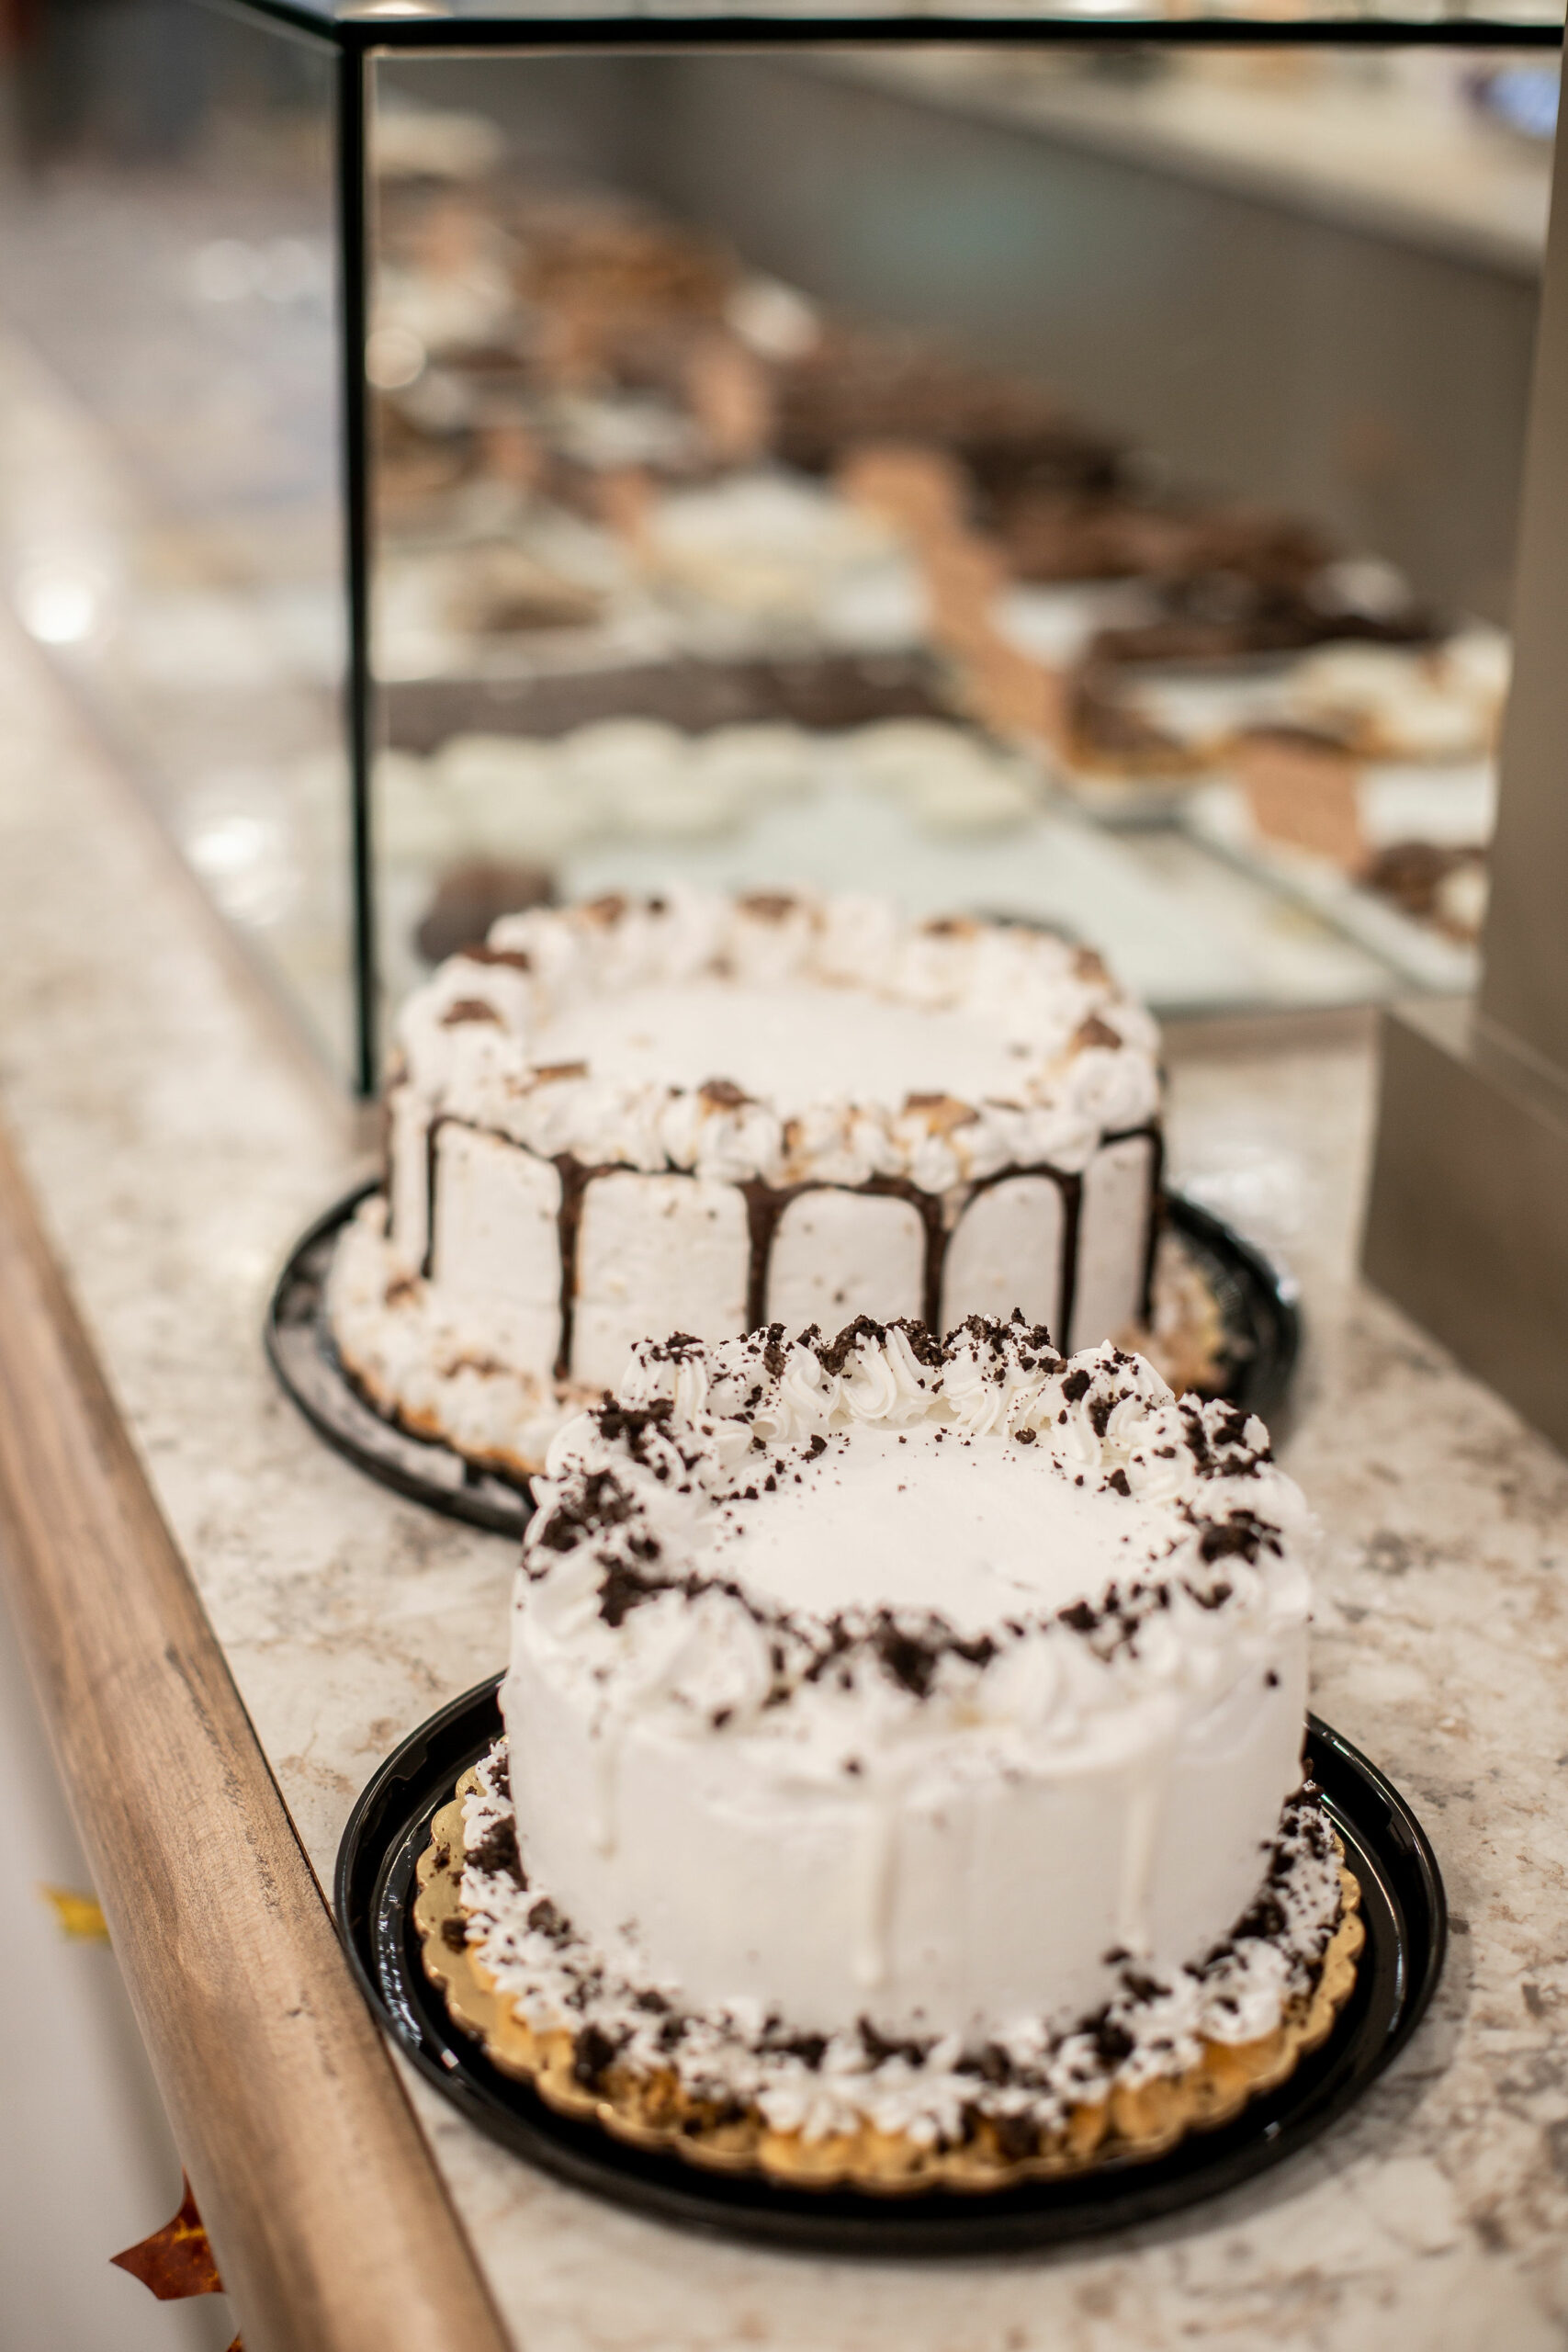 Kilwins - Forget EVERYTHING you believe about Ice Cream Cake…Kilwins  Gourmet Cake and Ice Cream is the perfect pairing of our own freshly-baked  cake, with our Original Recipe Ice Cream layered right